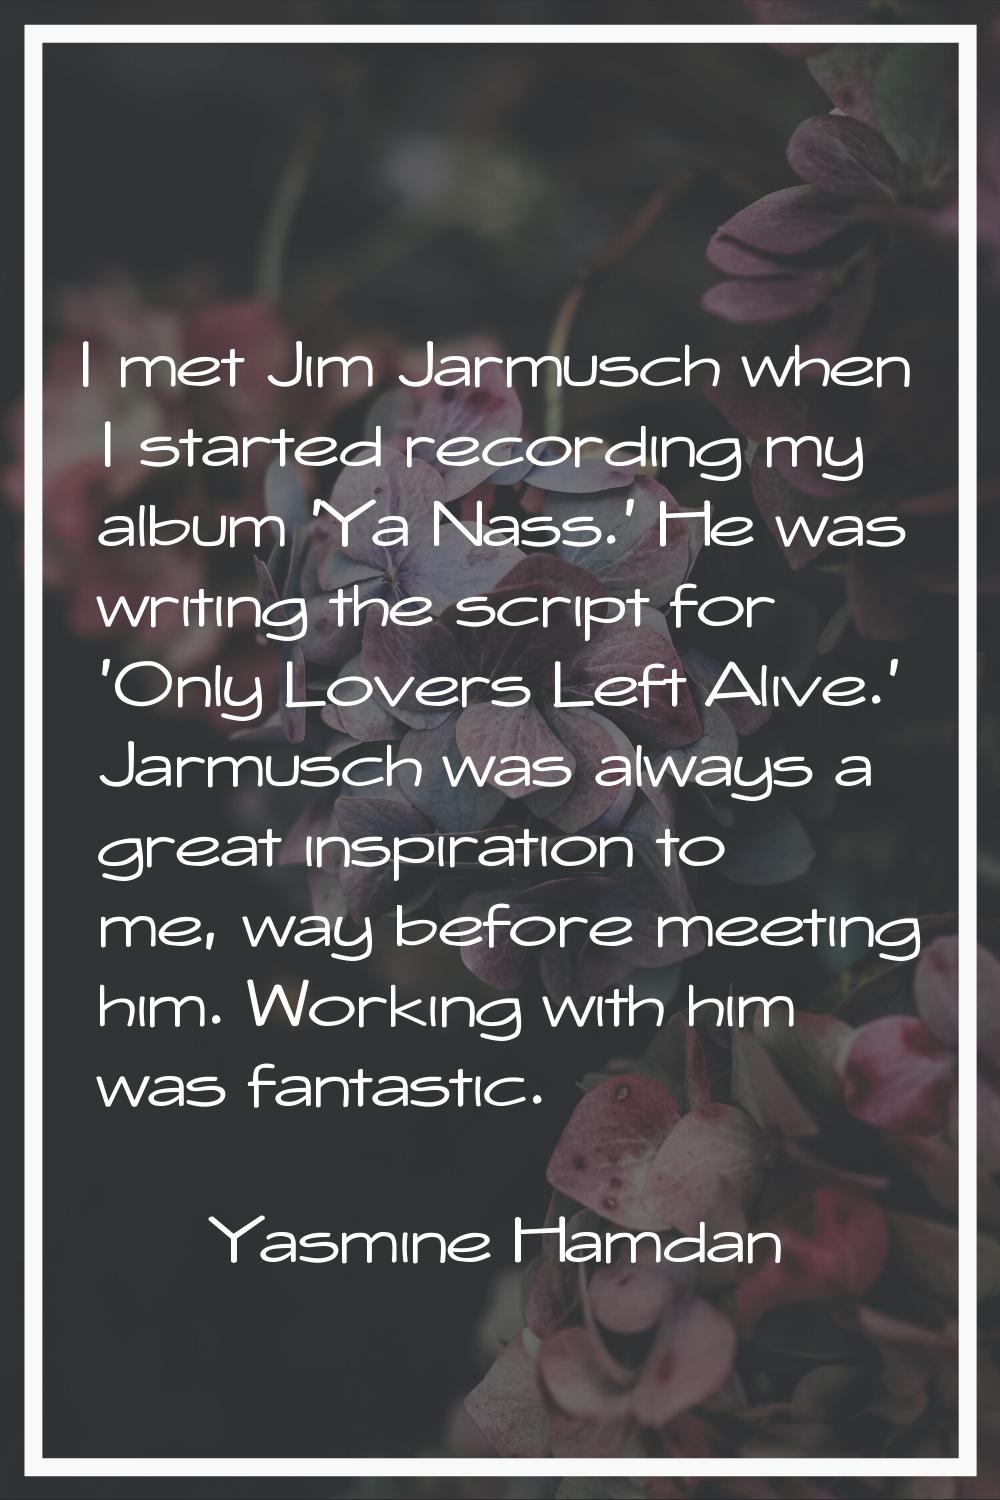 I met Jim Jarmusch when I started recording my album 'Ya Nass.' He was writing the script for 'Only